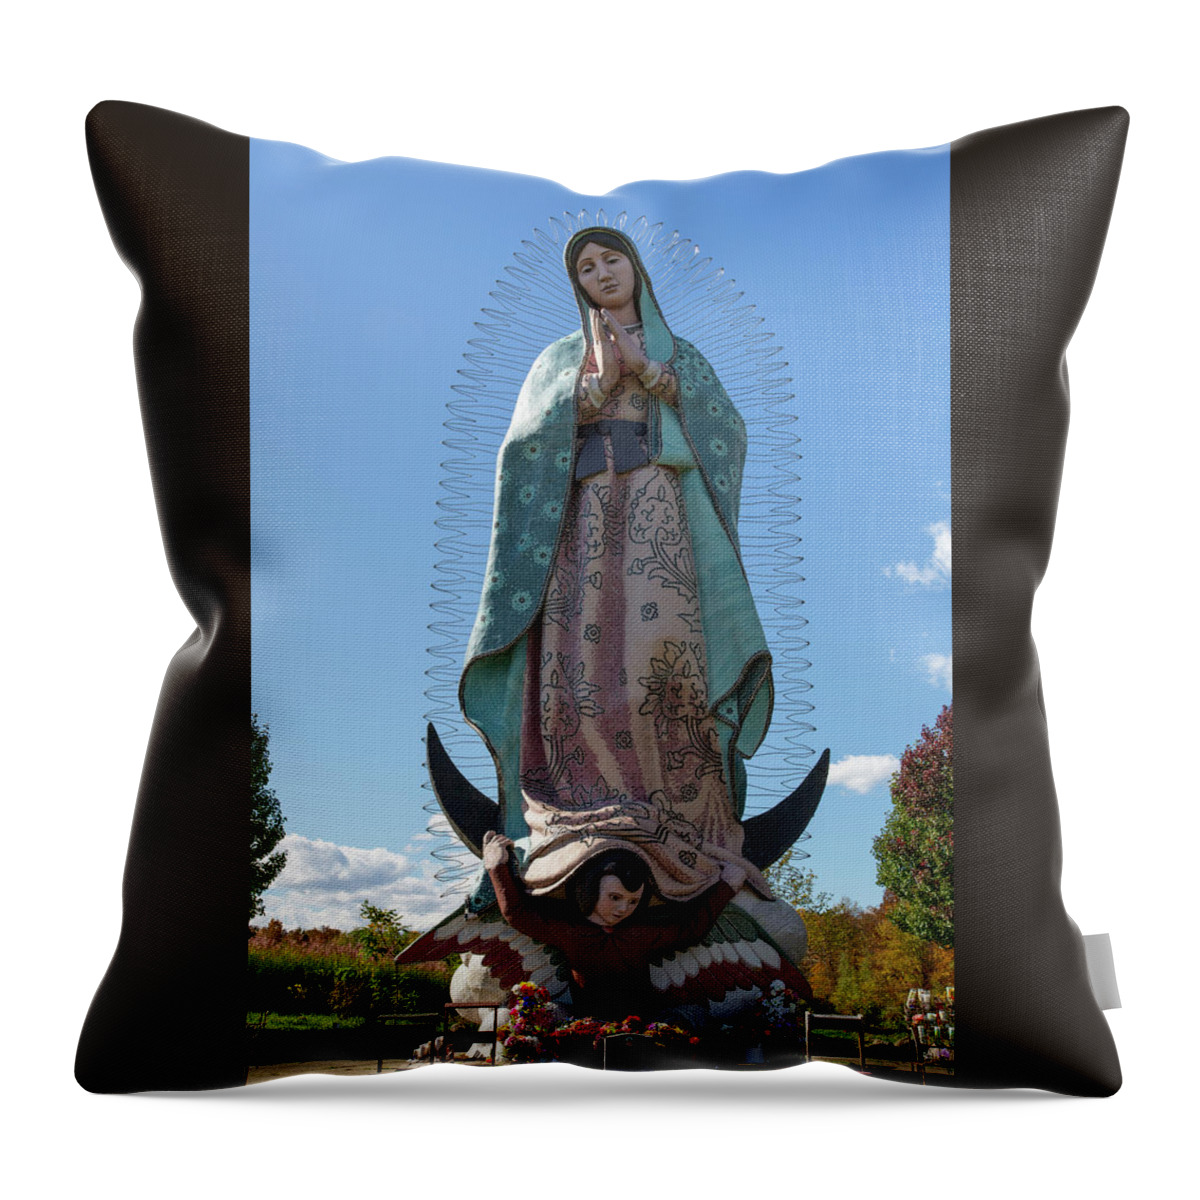 Statue Of Our Lady Of Guadalupe Throw Pillow featuring the photograph Statue Of Our Lady Of Guadalupe by Dale Kincaid